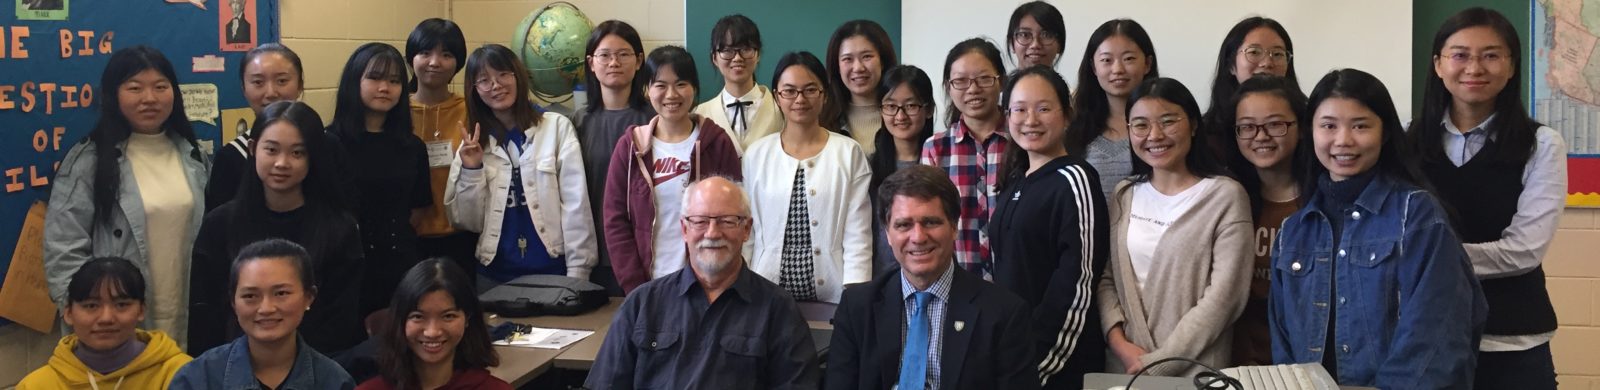 Dr. Smith and Dr. Bayley with students from Southwest University (China) who are participating in the Reciprocal Learning Program